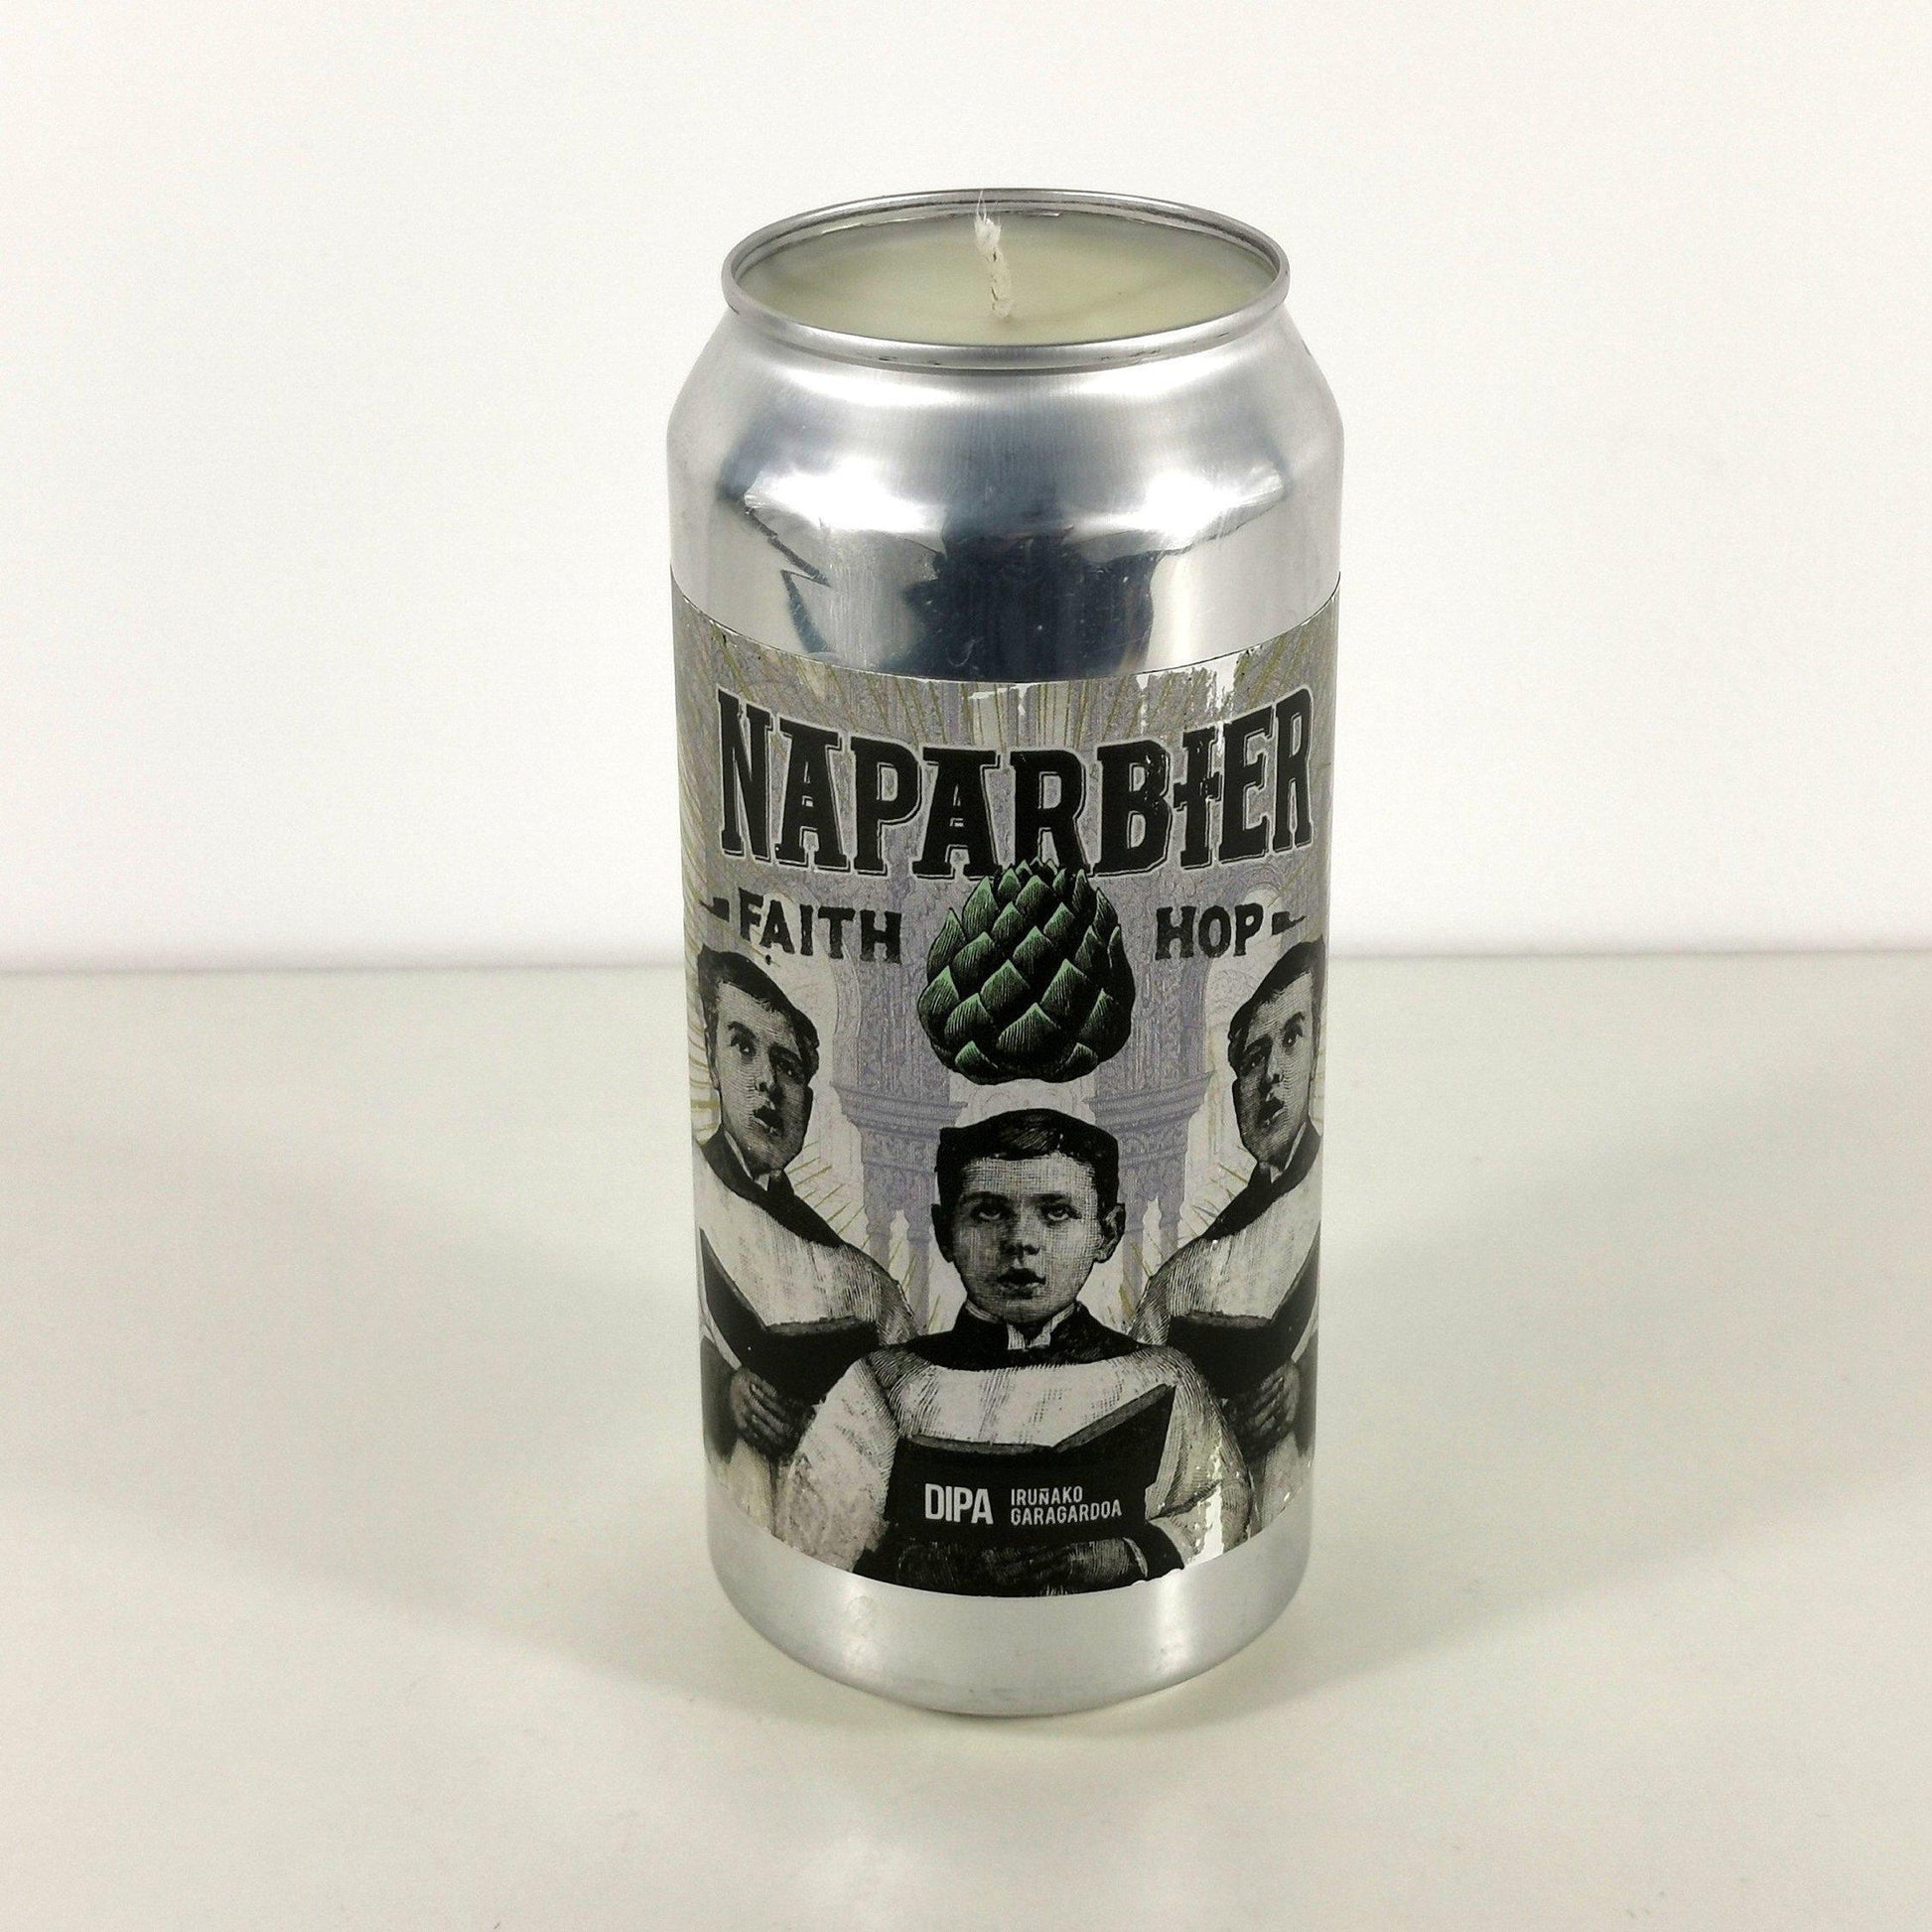 Faith Hop. Naparbier Brewery Craft Beer Can Candle Beer Can Candles Adhock Homeware